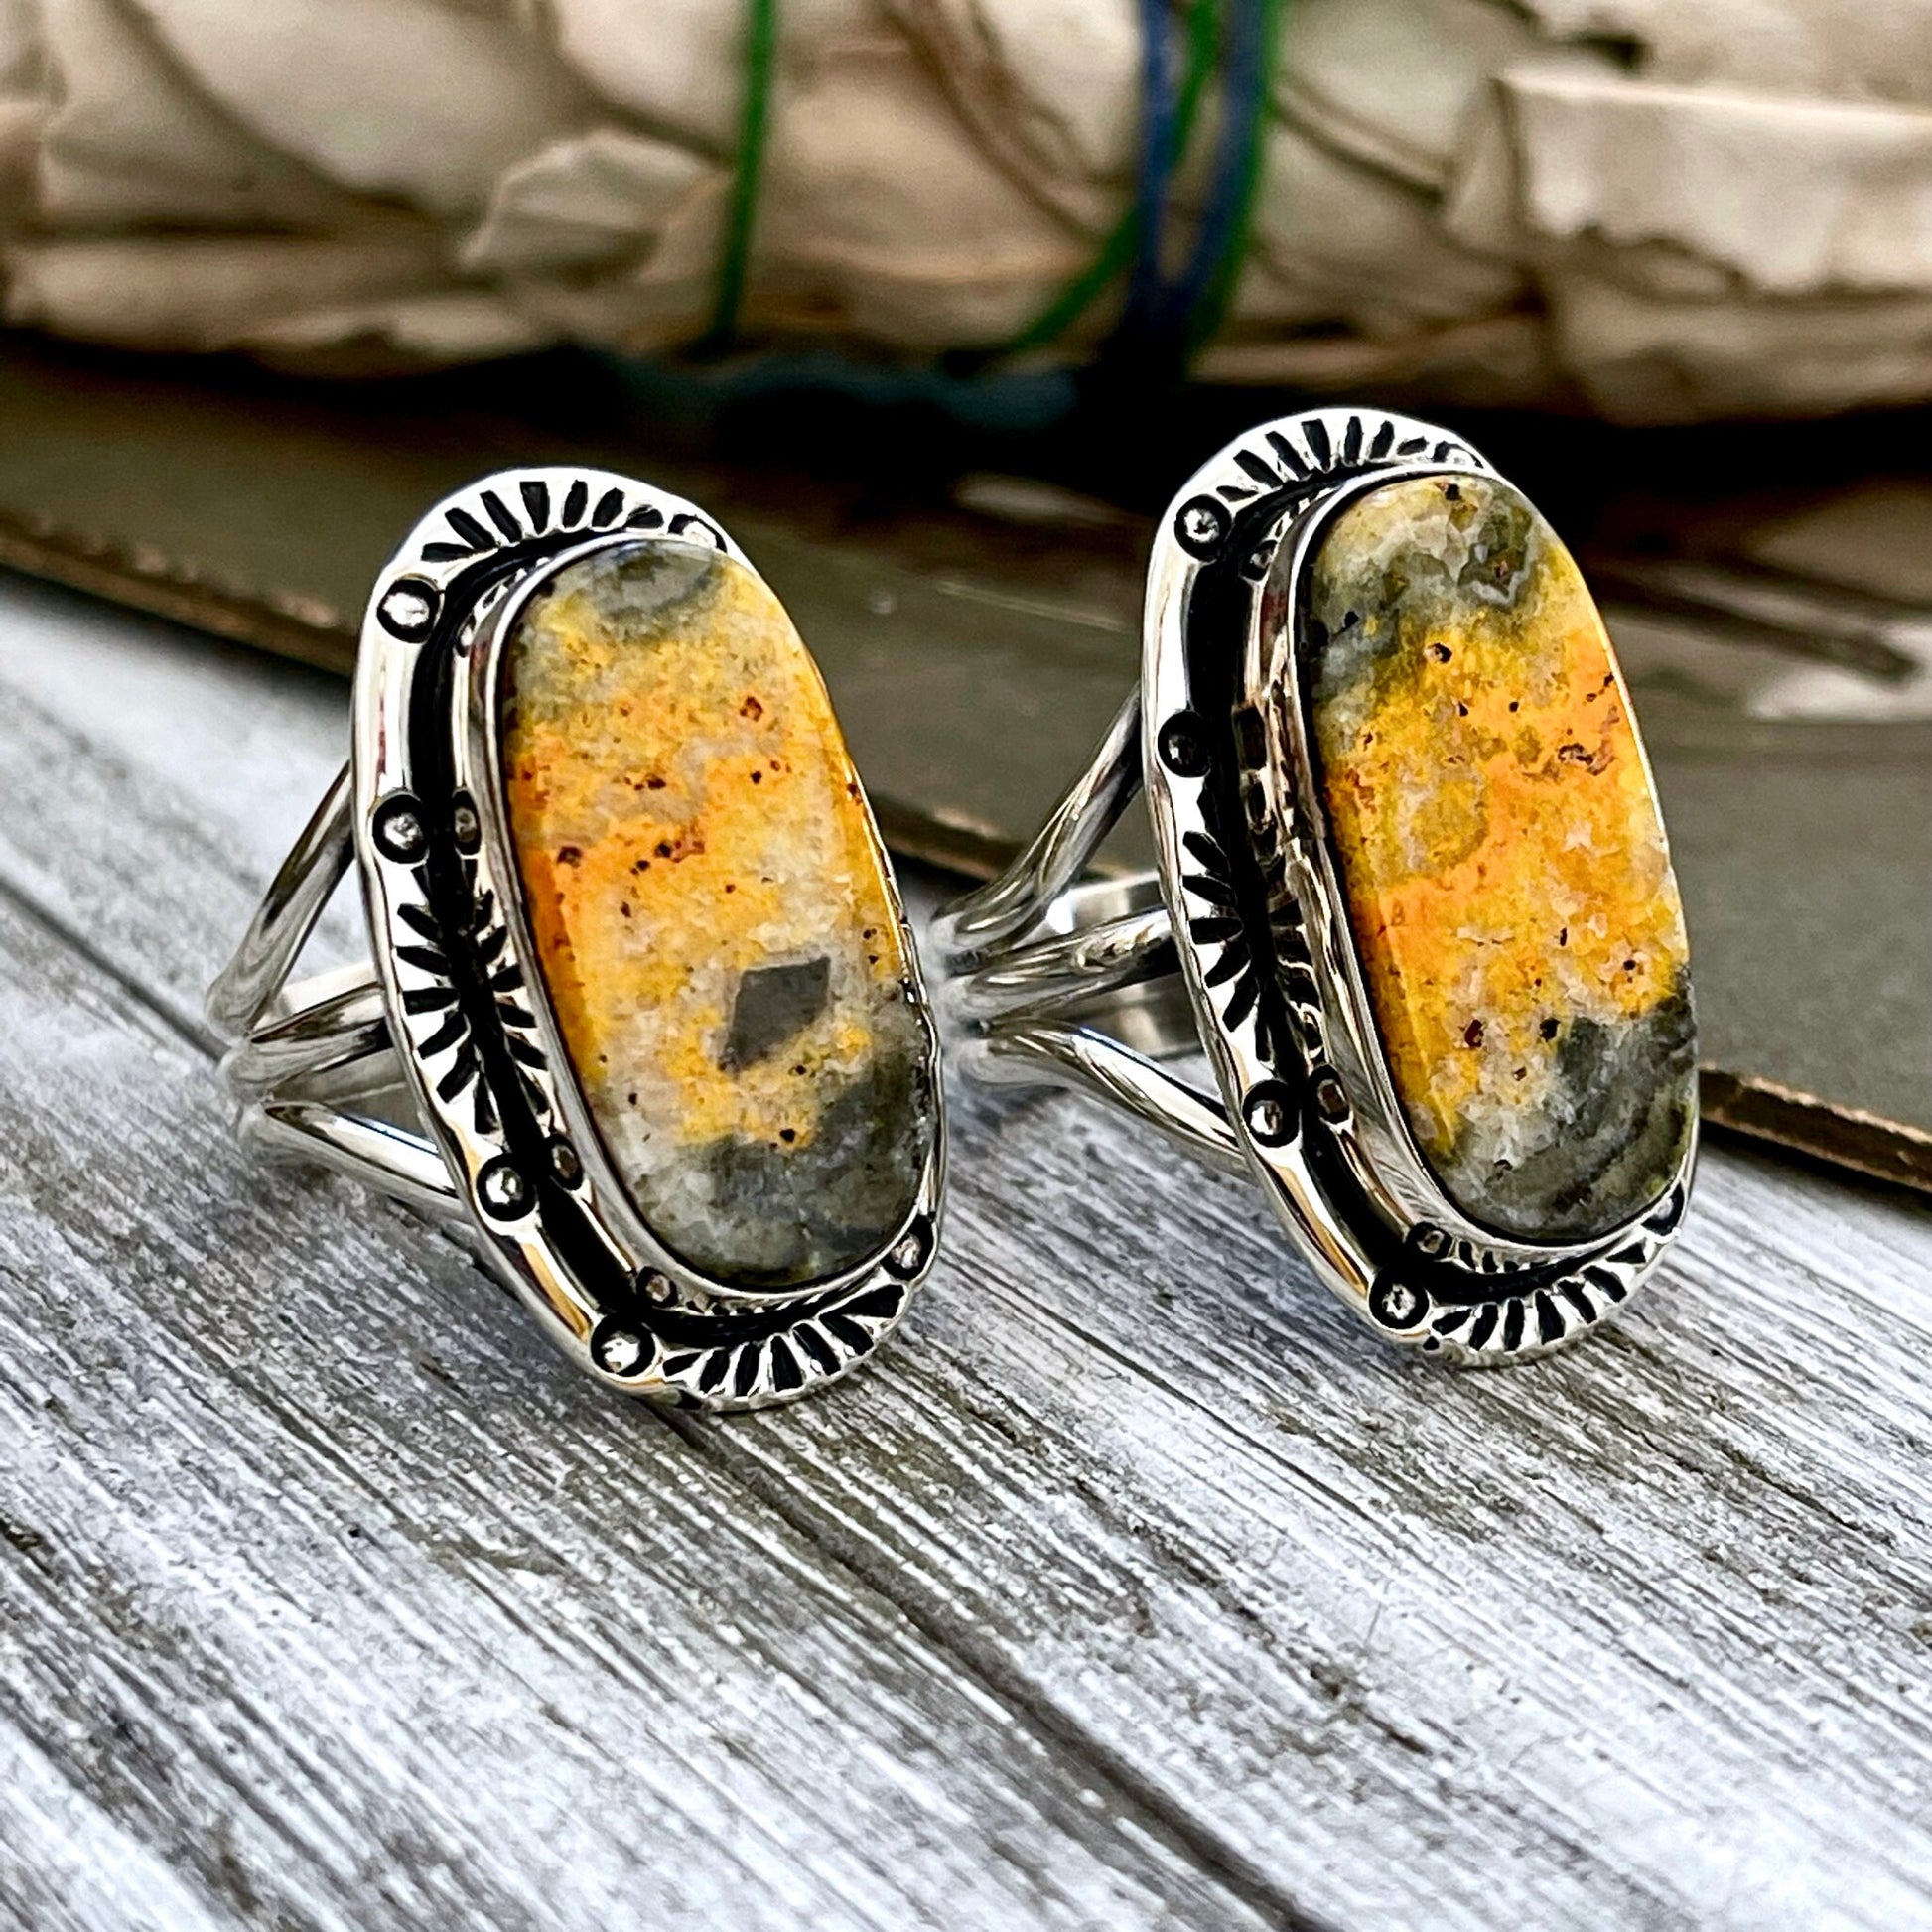 Big Ring, Big Stone Ring, Bohemian Ring, boho jewelry, boho ring, Crystal Jewelry, crystal ring, CURATED- RINGS, Etsy ID: 1339587819, Festival Jewelry, Foxlark Alchemy, gypsy ring, Jewelry, Large Crystal, Rings, Silver Stone Ring, Statement Ring, Statemen